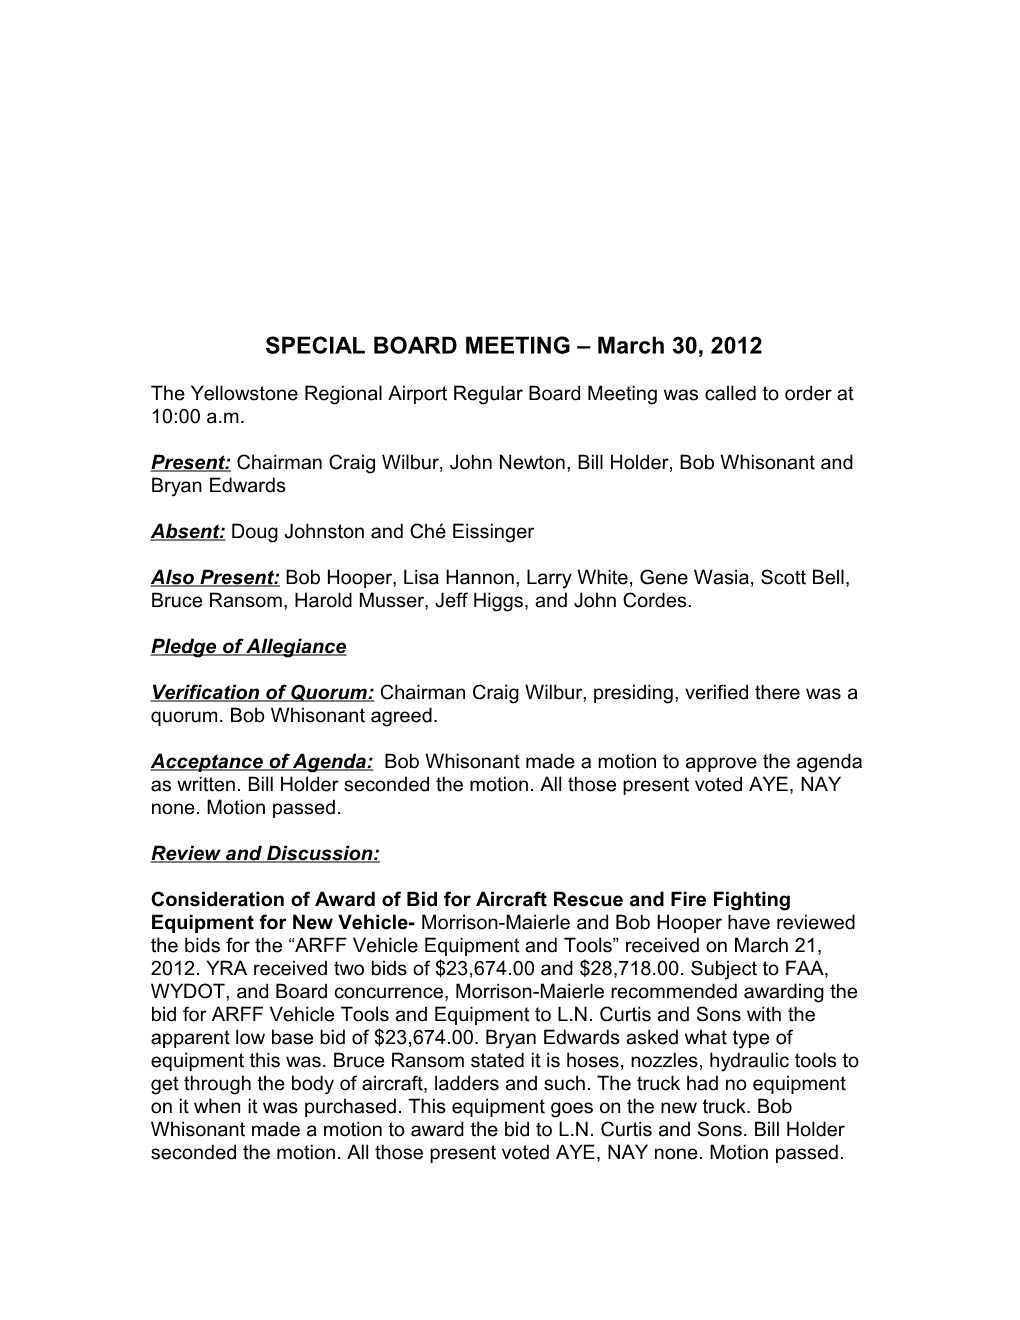 SPECIAL BOARD MEETING March 30, 2012